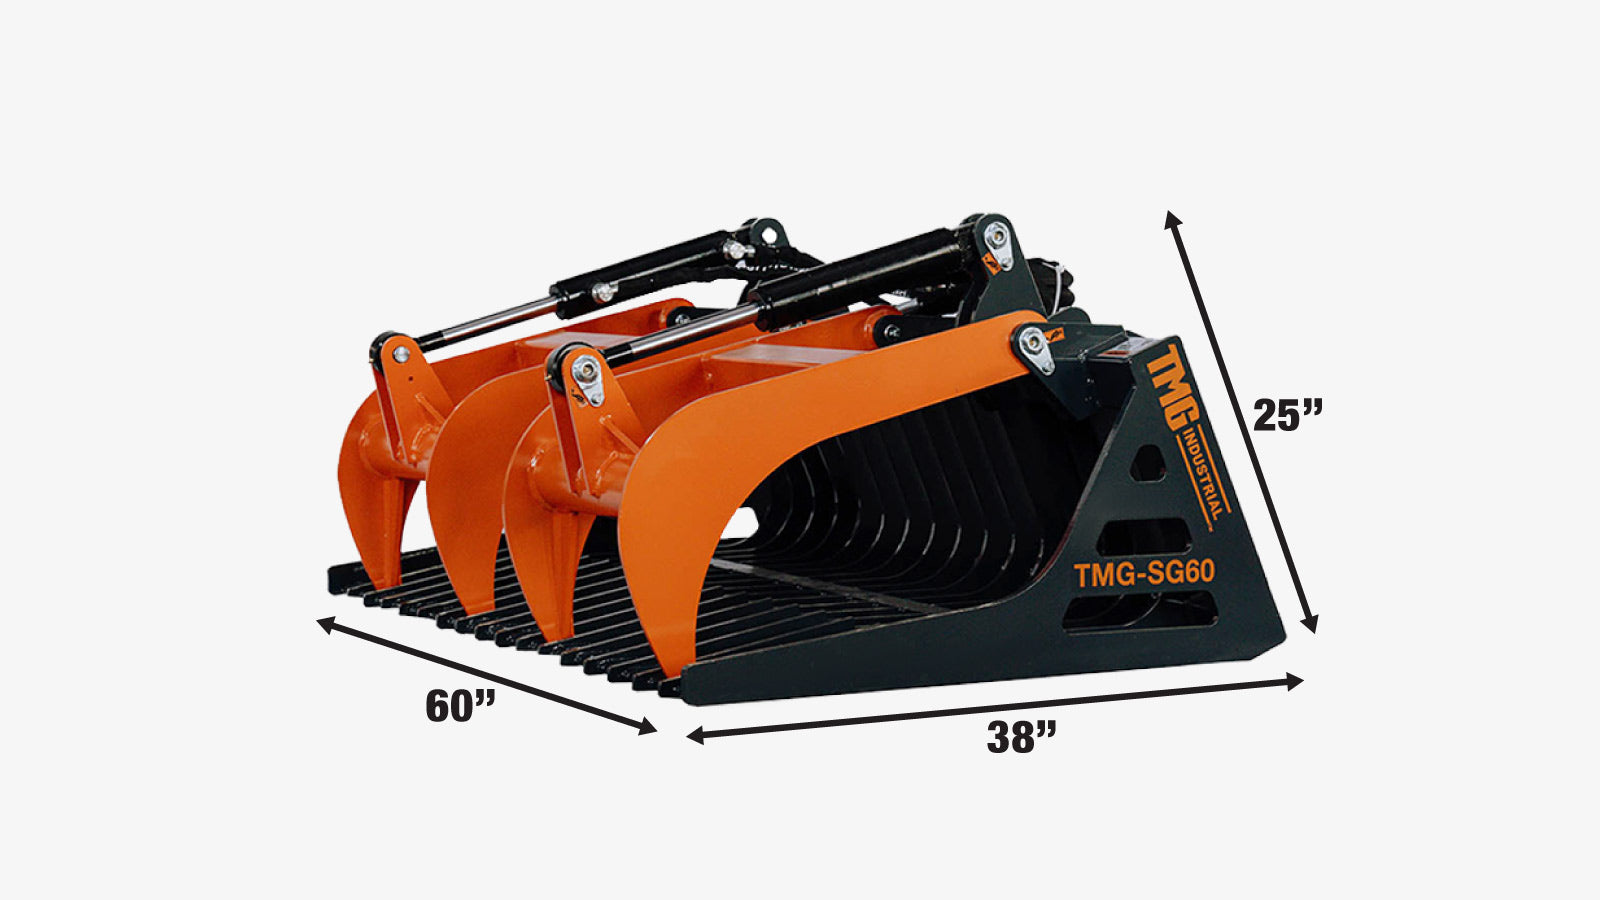 TMG Industrial 60” Skid Steer Skeleton Grapple Attachment, Universal Mount, 34” Arm Opening, 3” Tine Spacing, 2600 lb Weight Capacity, TMG-SG60-specifications-image